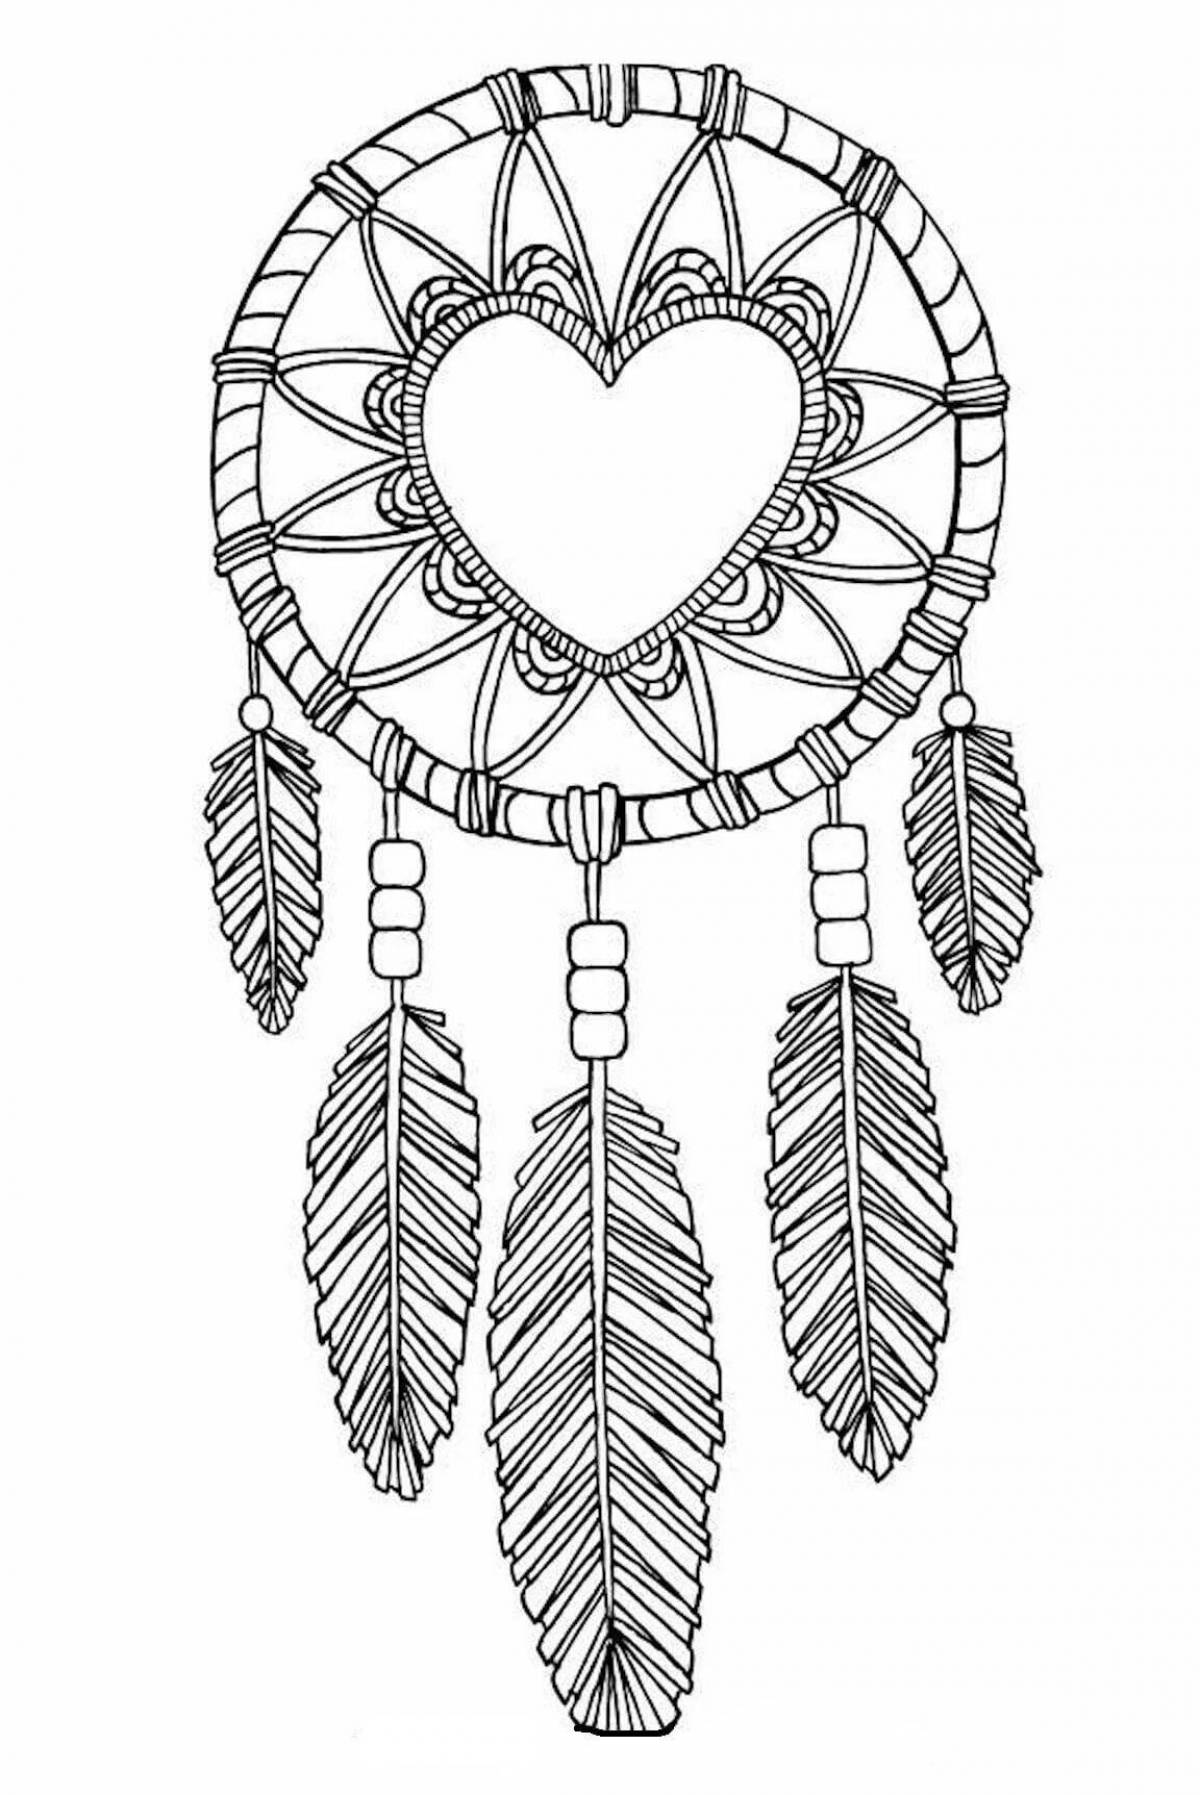 Colorful dreamcatcher coloring page